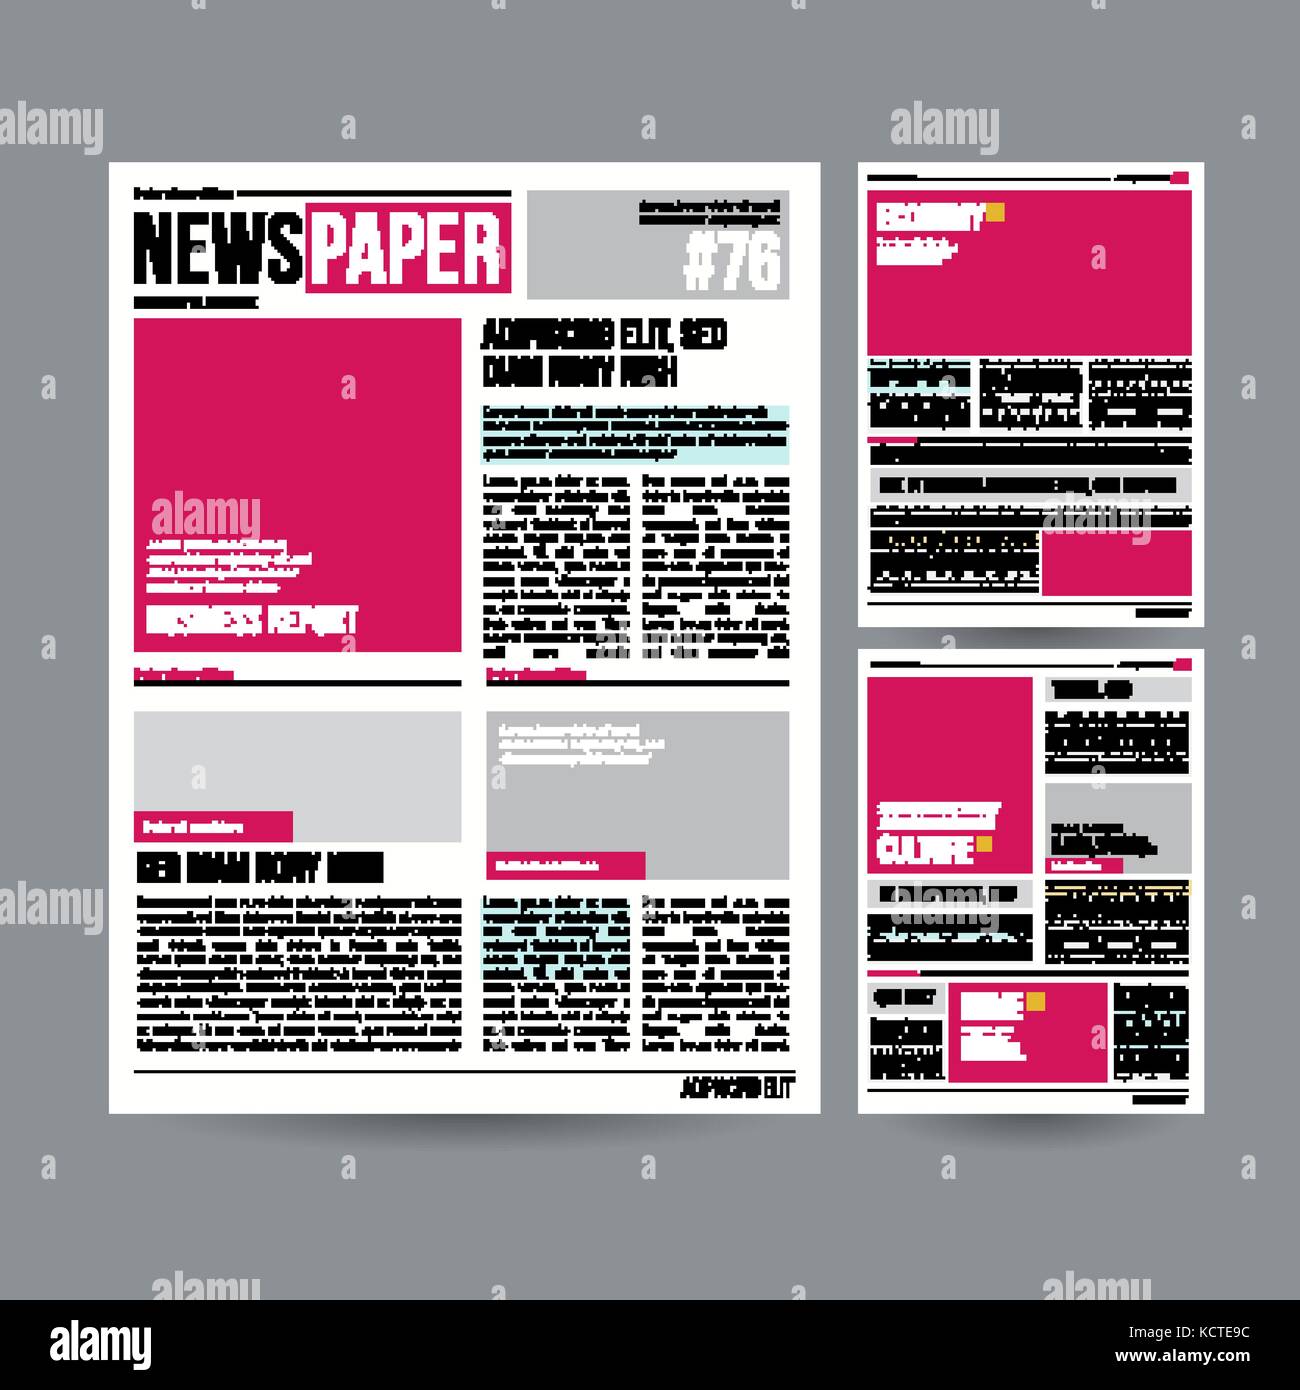 Newspaper Articles Template from c8.alamy.com